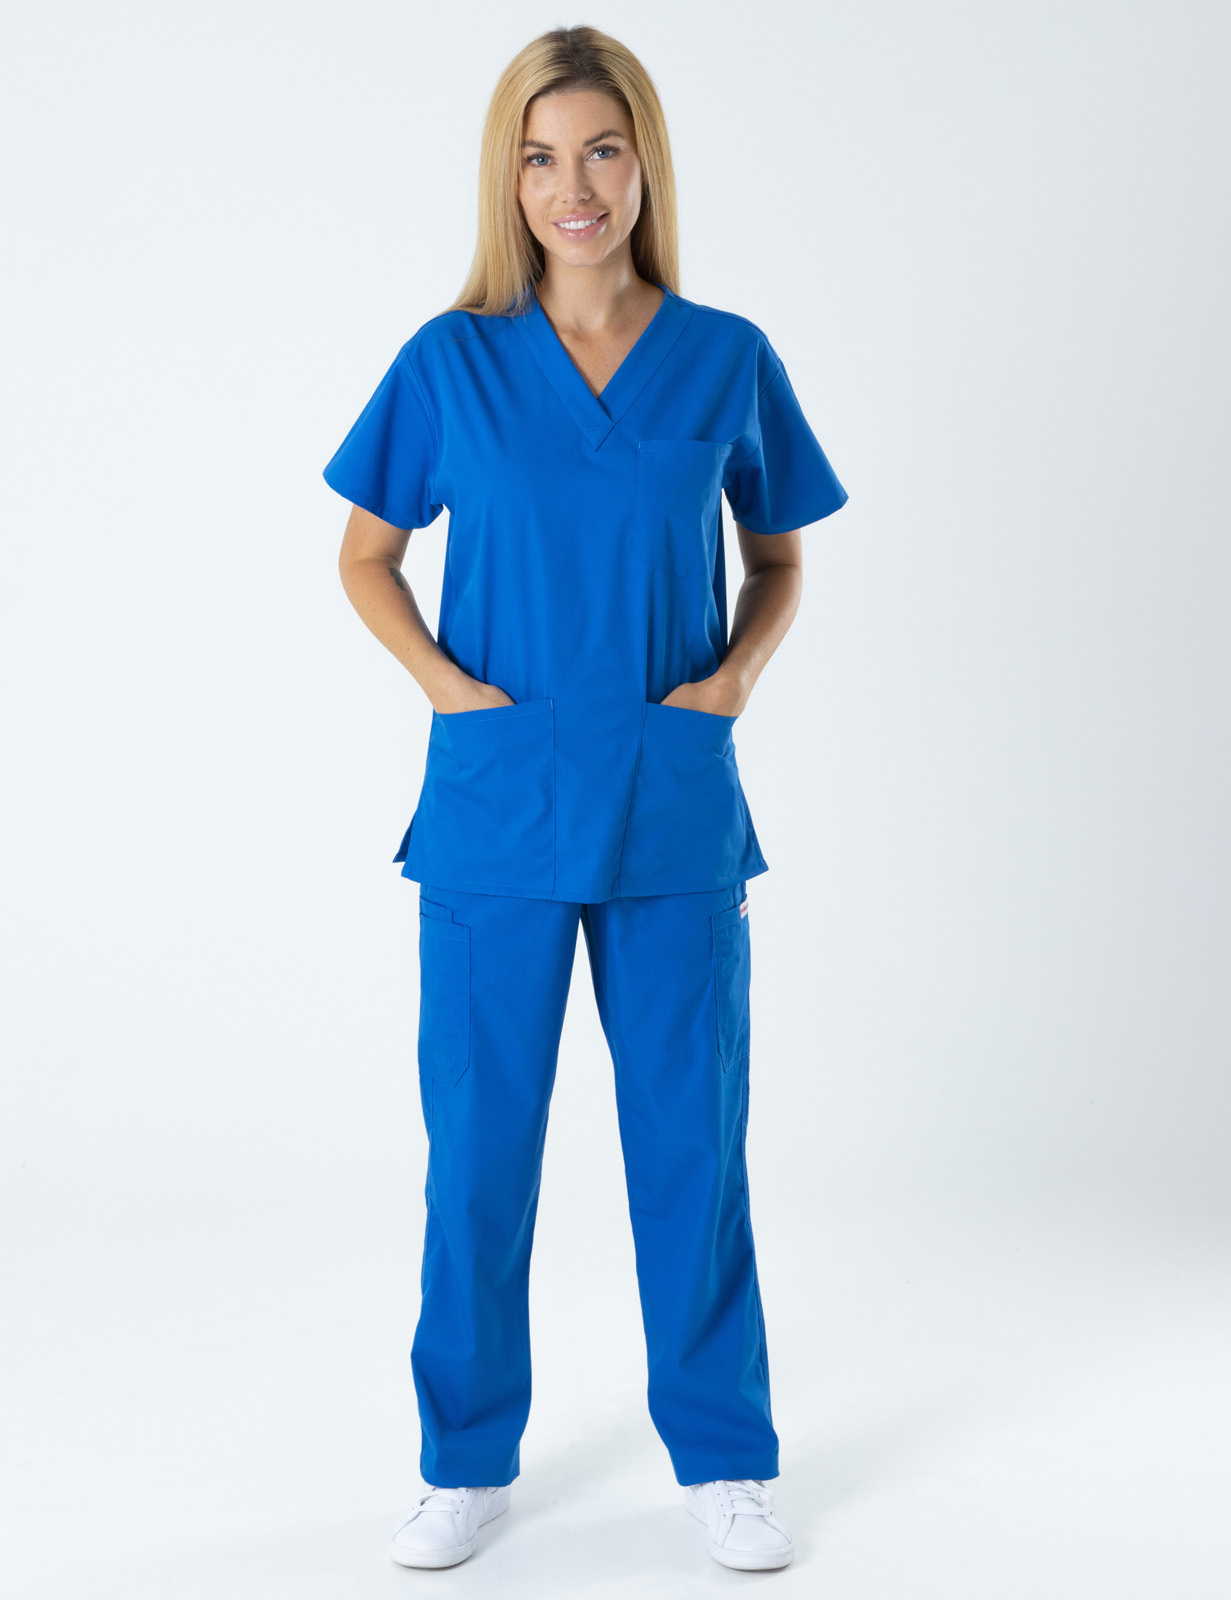 Children's Health Queensland (4 Pocket Scrub Top and Cargo Pants in Royal incl Logos)